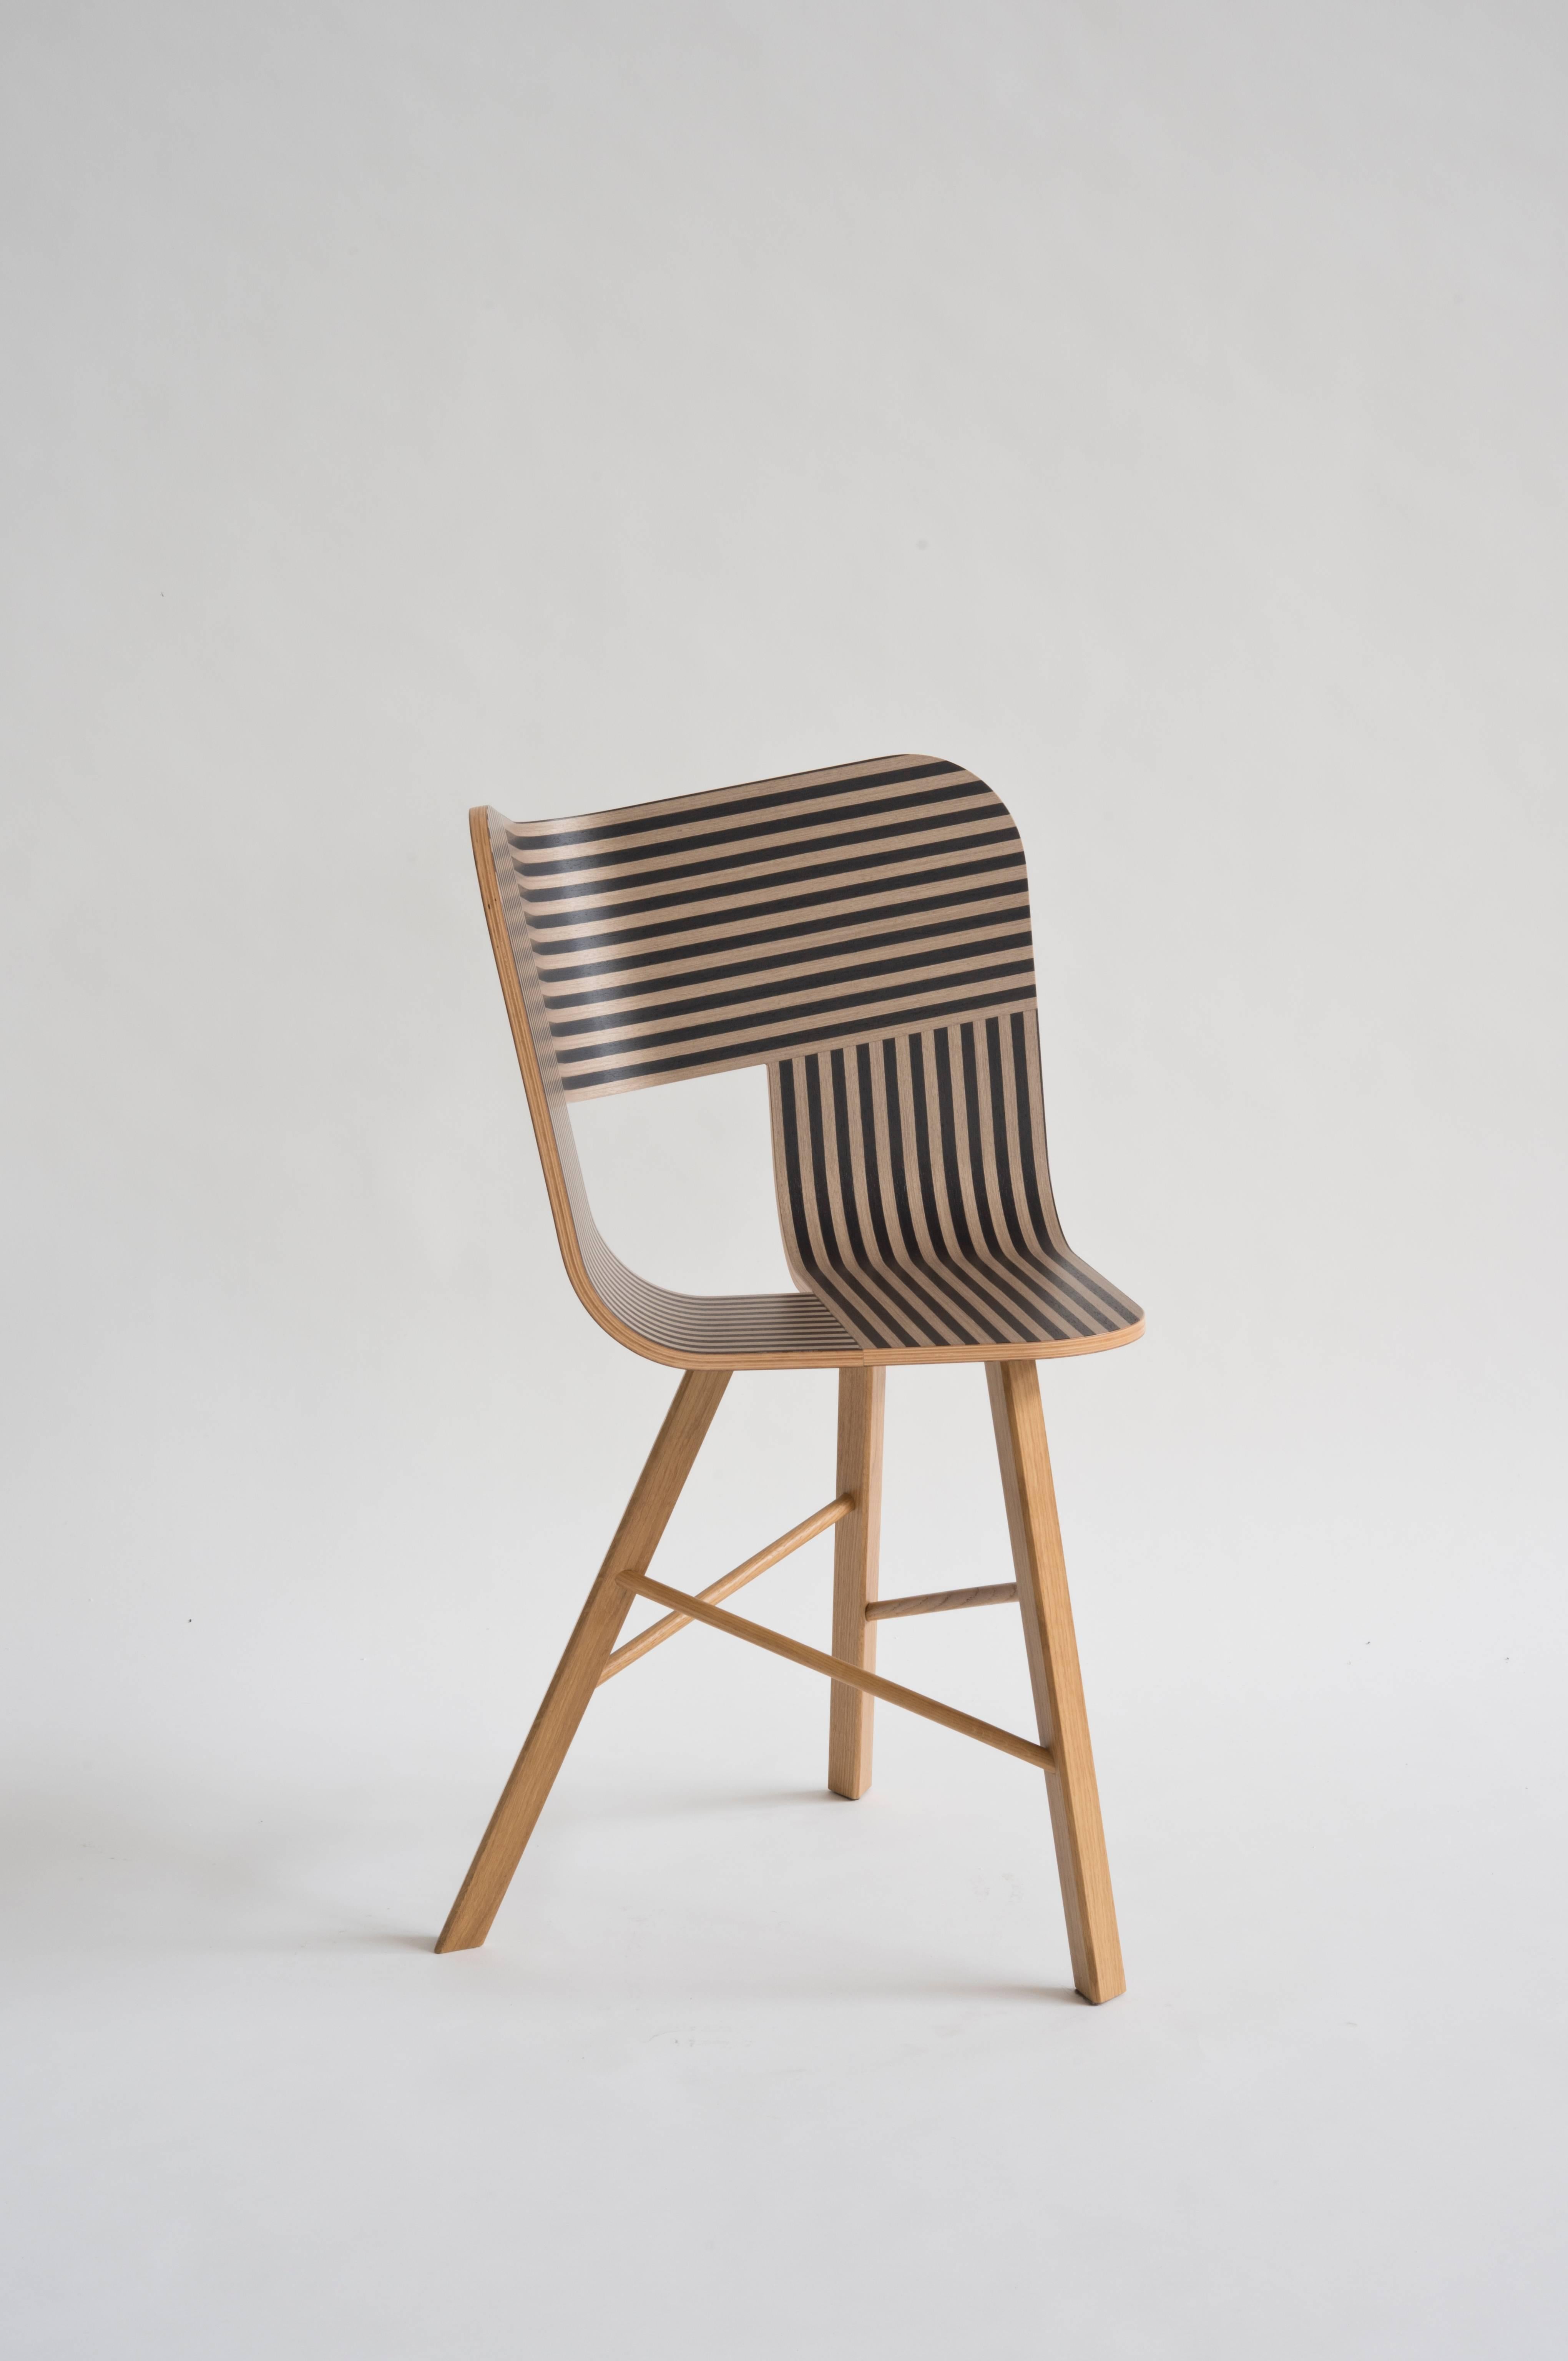 Tria wood chair is the icon of our collection. It's a table chair, but many people use it as a sculpture for the Ambience, in an entrance, a bedroom or in a living room. It recalls the impossible forms of Dutch graphic artist and engraver Maurits